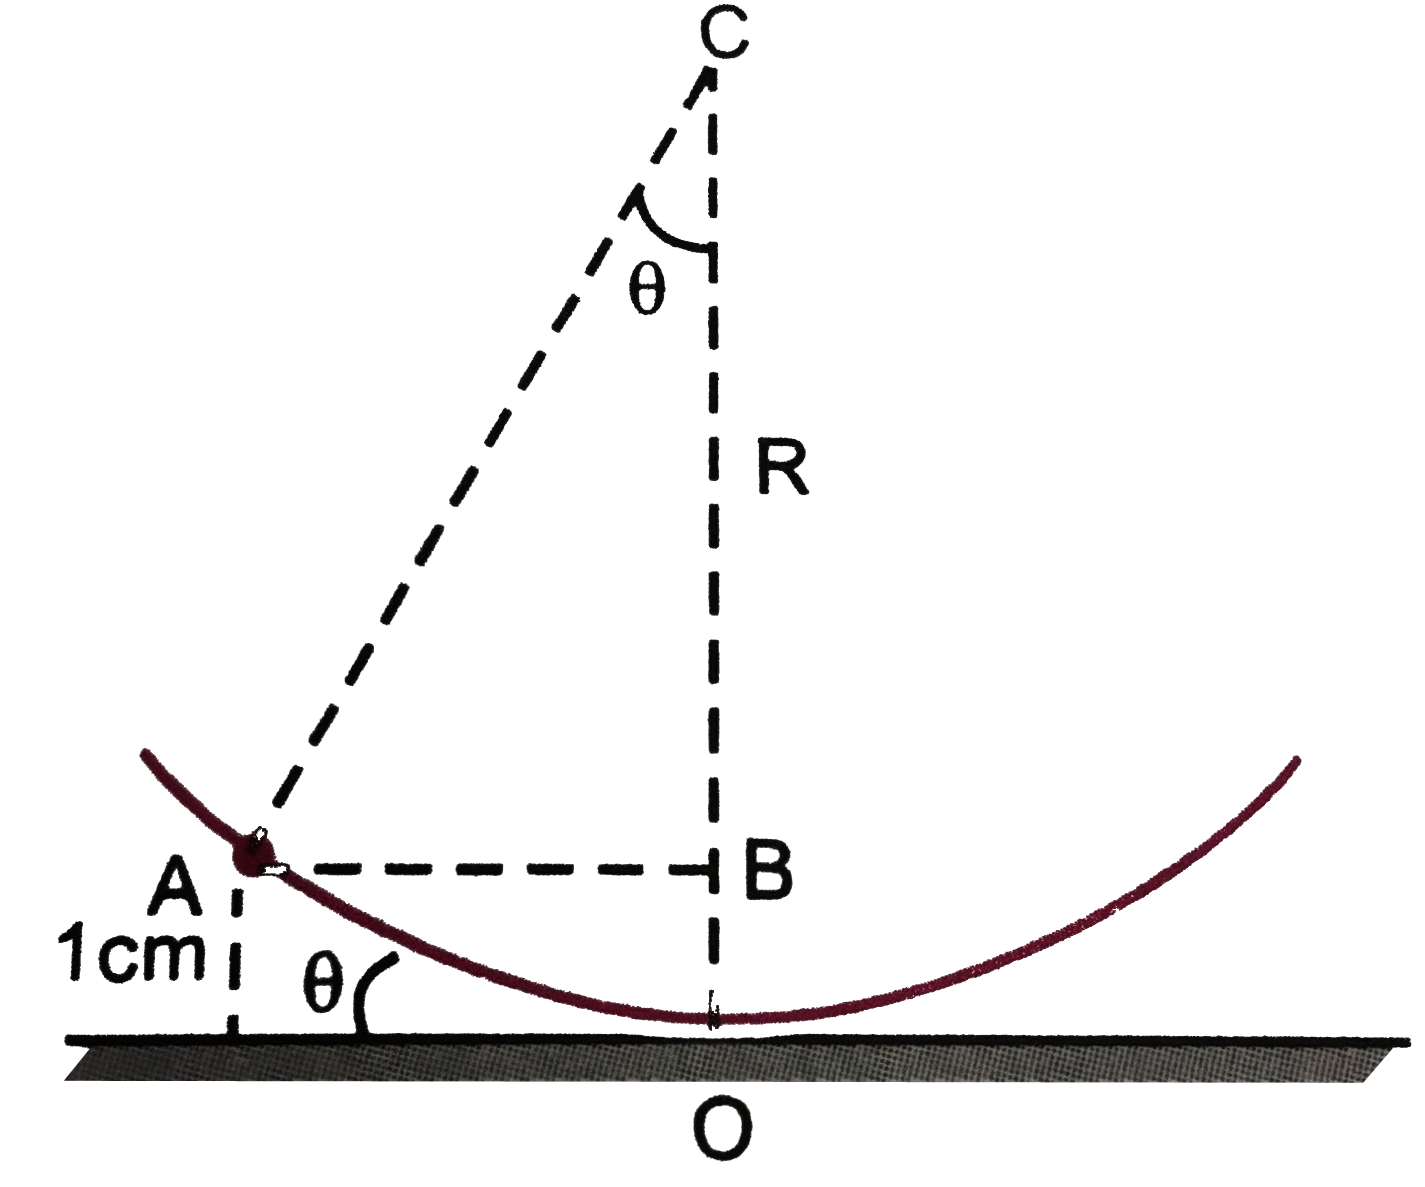 A particle of mass 1 g executes an oscillatory motion on the concave surface of a spherical dish of radius 2m placed on a horizontal plane, Figure . If the motion of the particle begins from a point on the dish at a height of 1 cm. from  the horizontal plane and coefficient of friction  is 0.01 , find the total distance (in meter) covered by the particle before coming to rest.